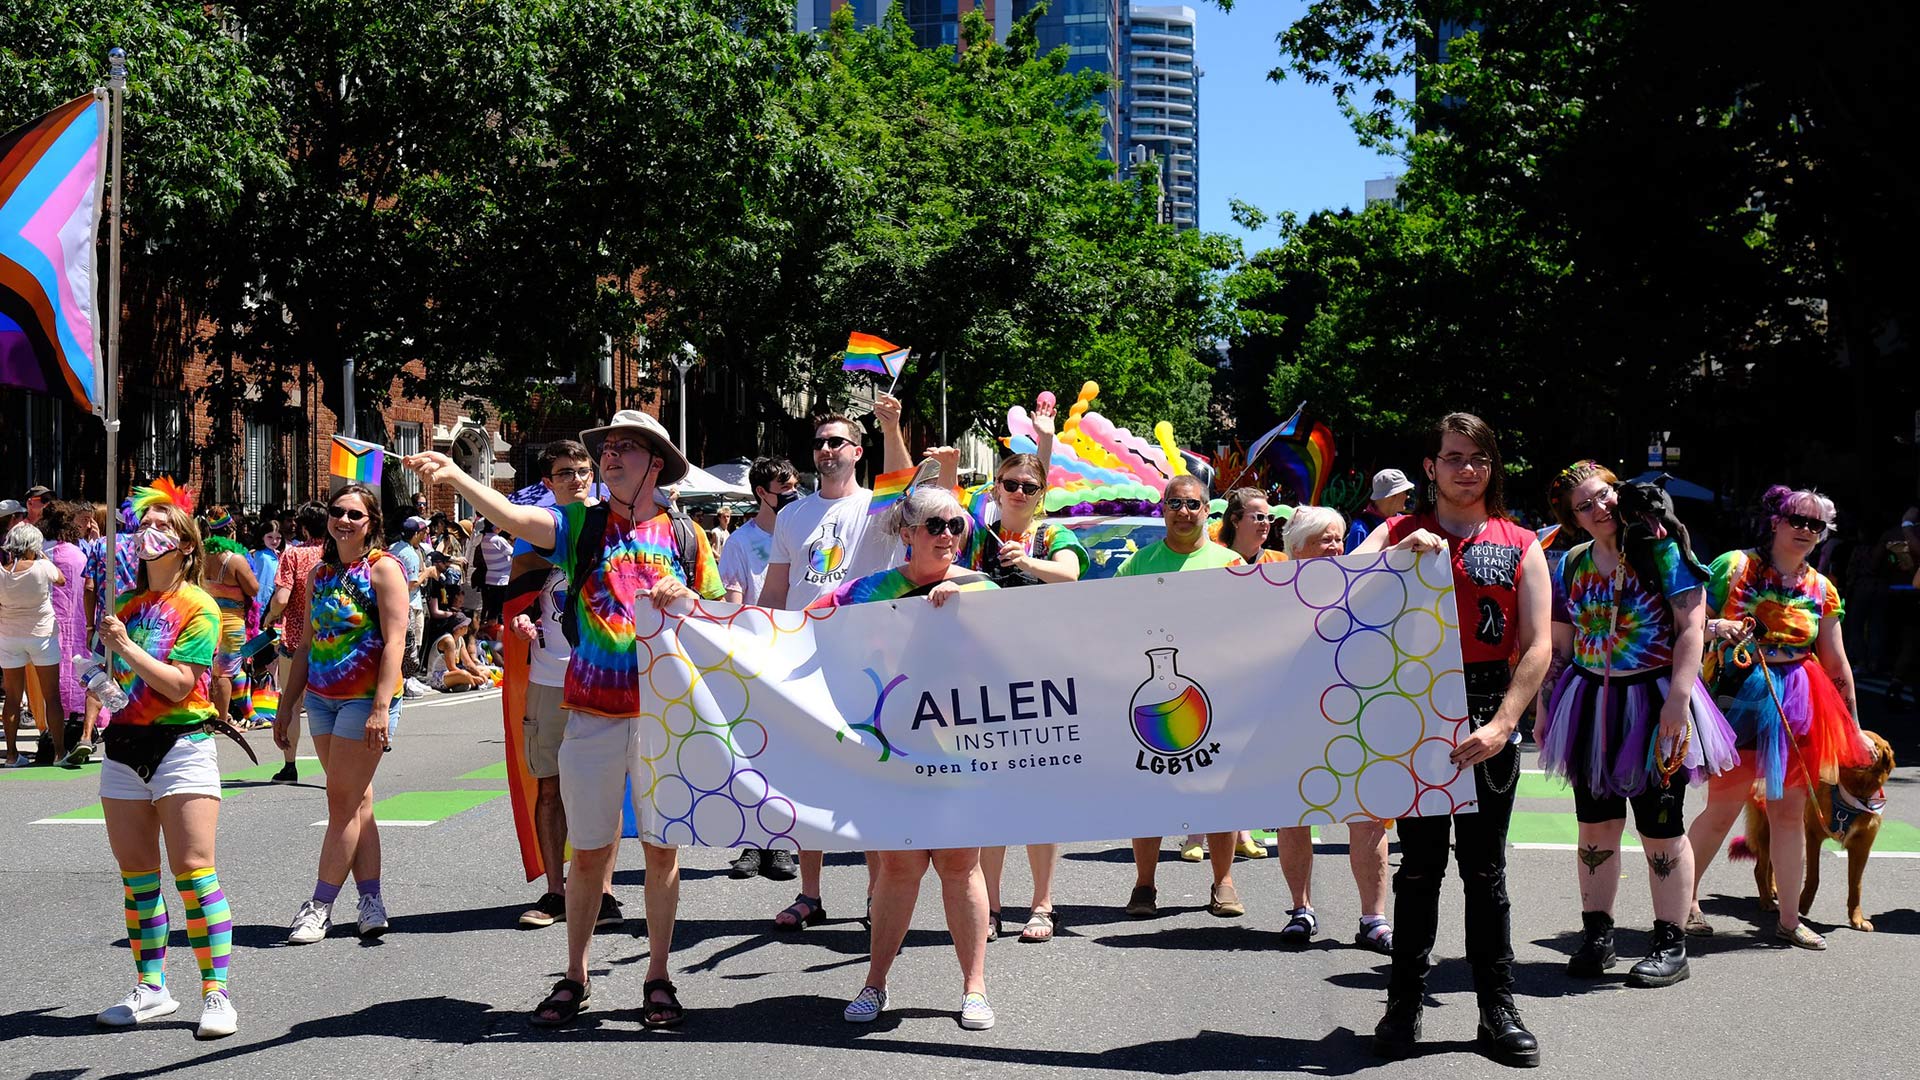 Allen Institute staff carrying banner at 2022 Seattle Pride Parade